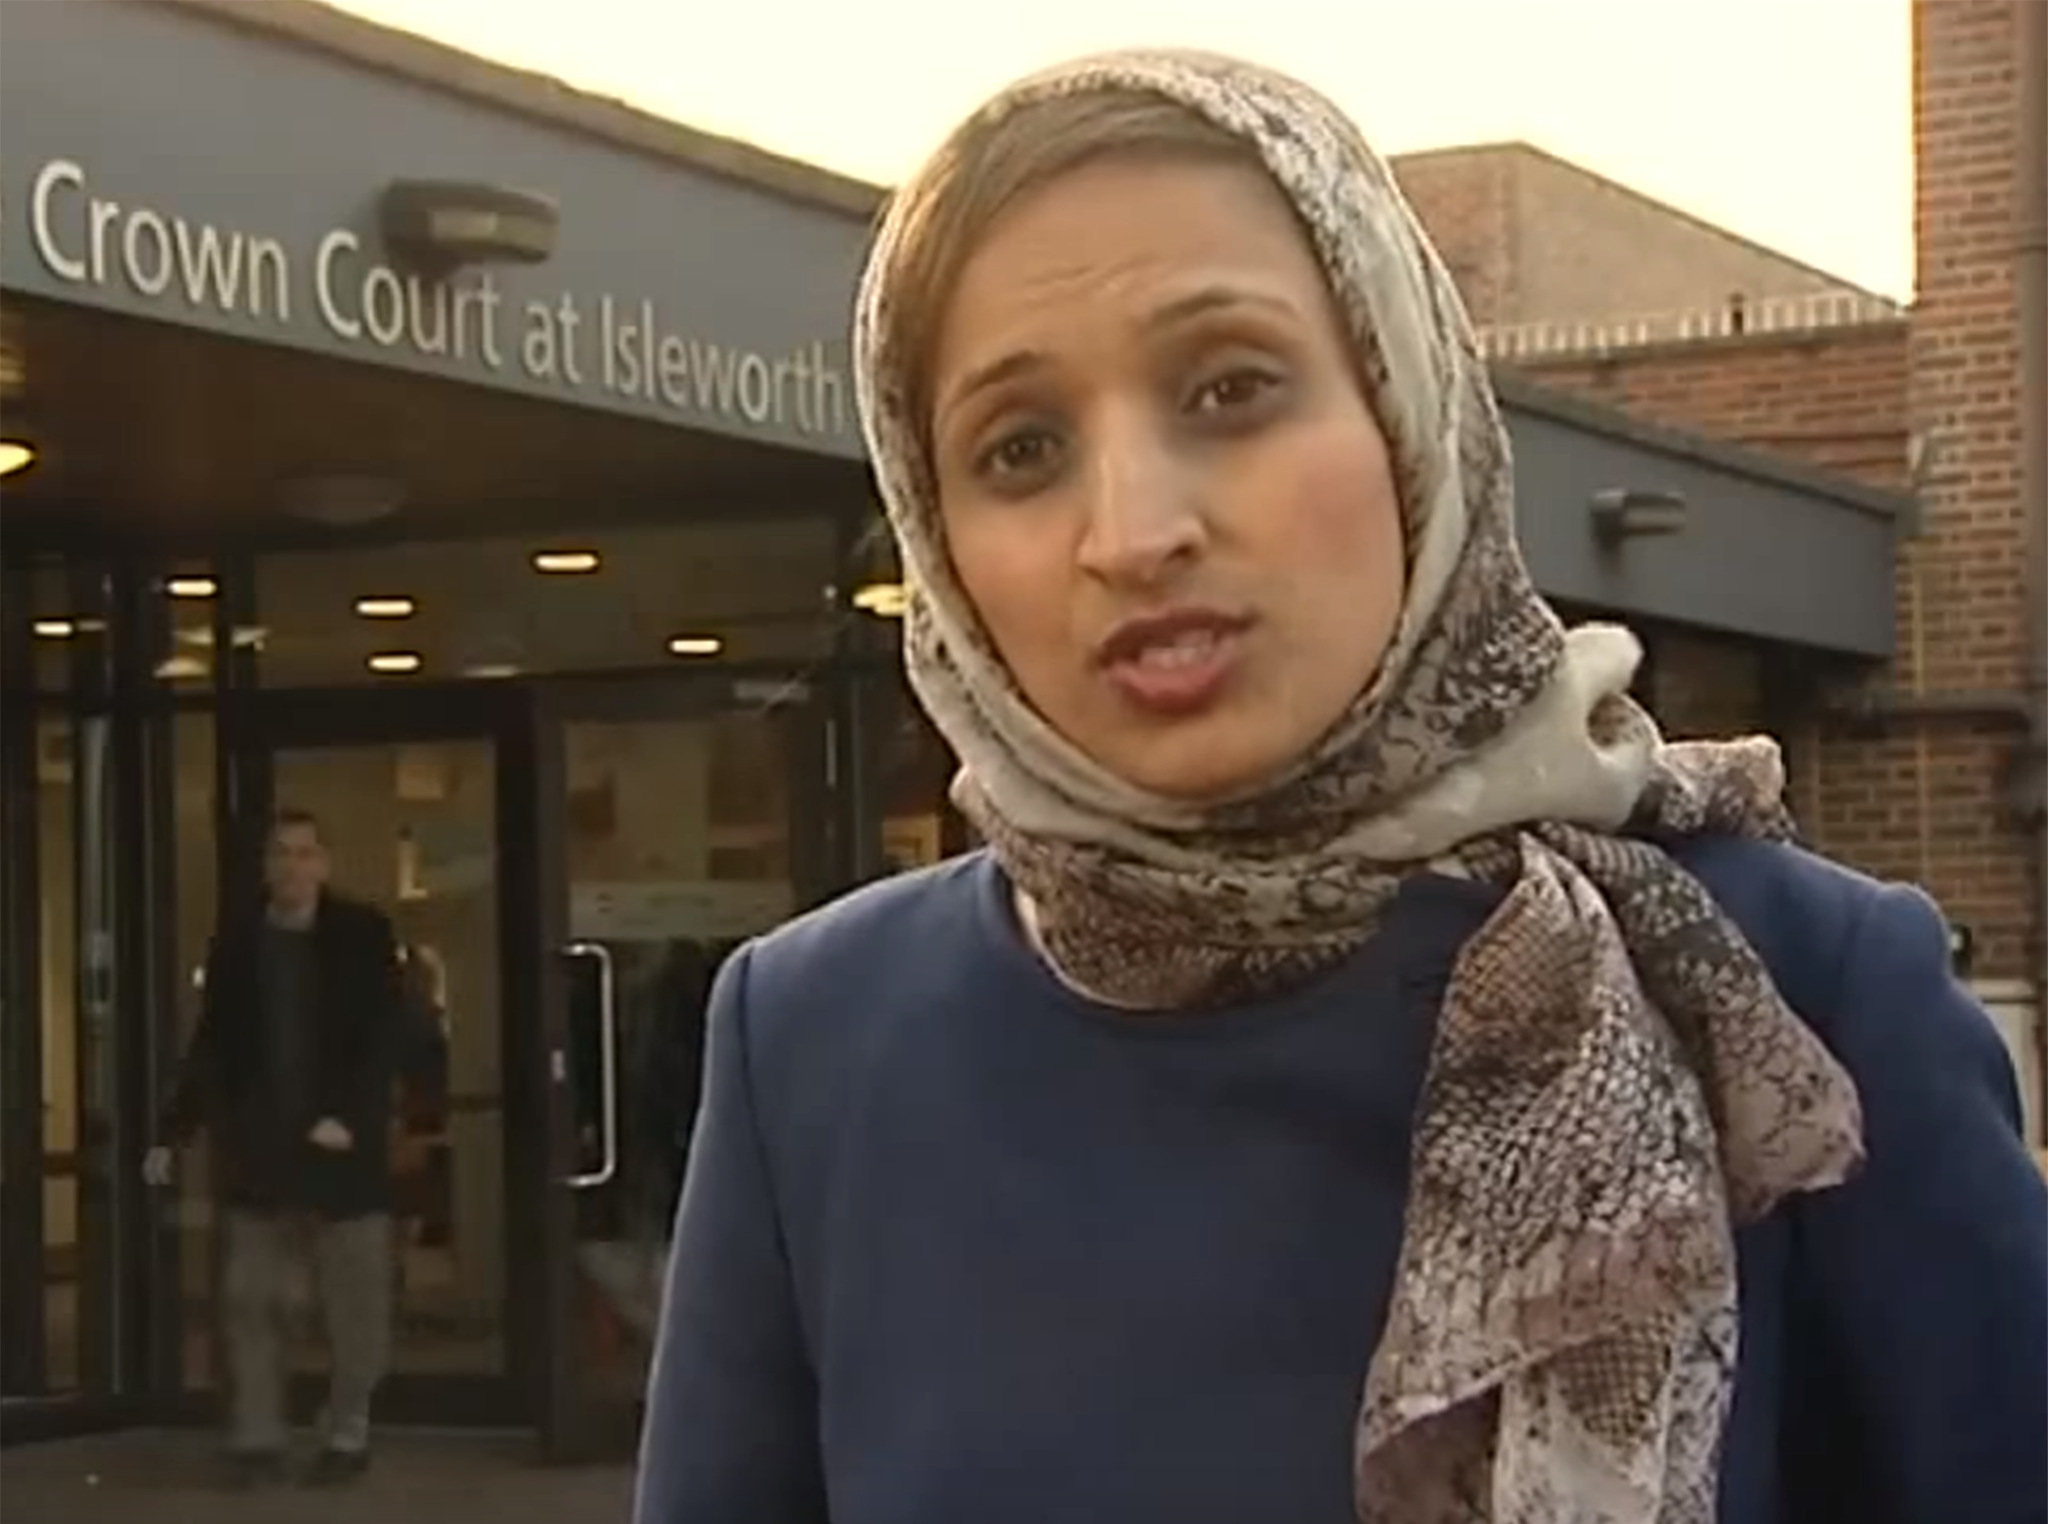 Fatima Manji joined Channel 4 News in 2012 after working for BBC East of England